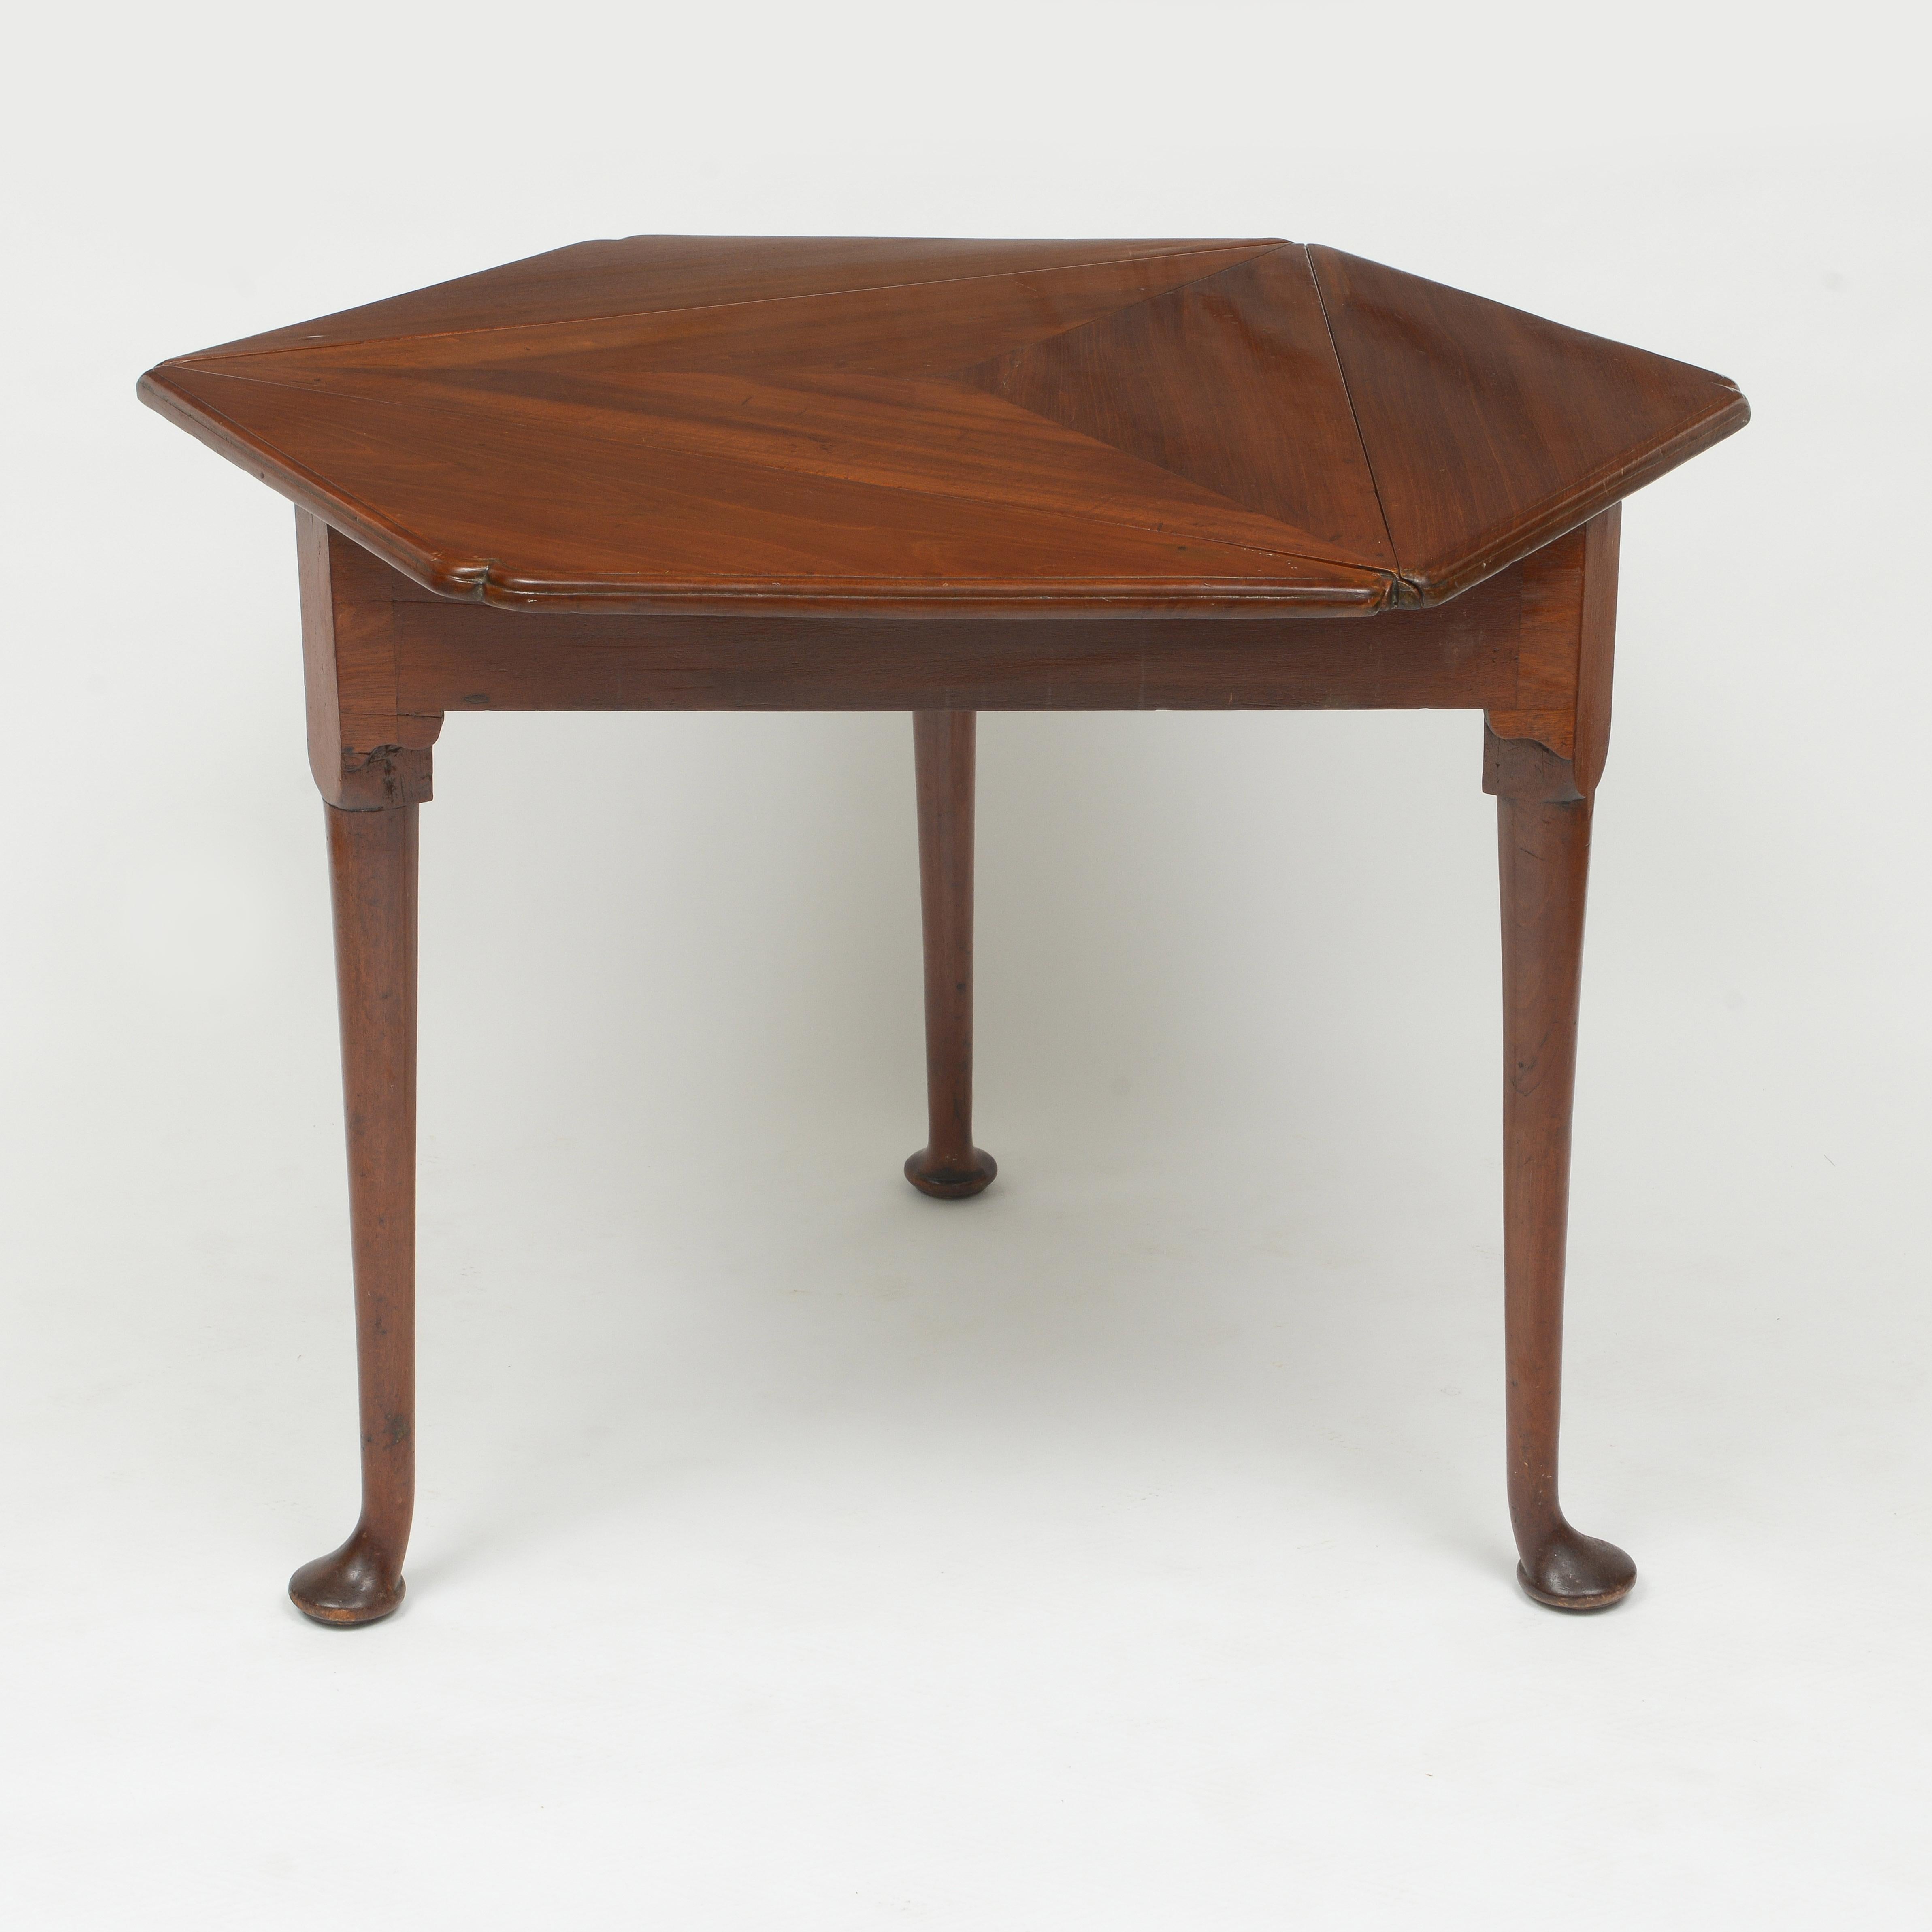 English Early 18th Century Mahogany Envelope Table For Sale